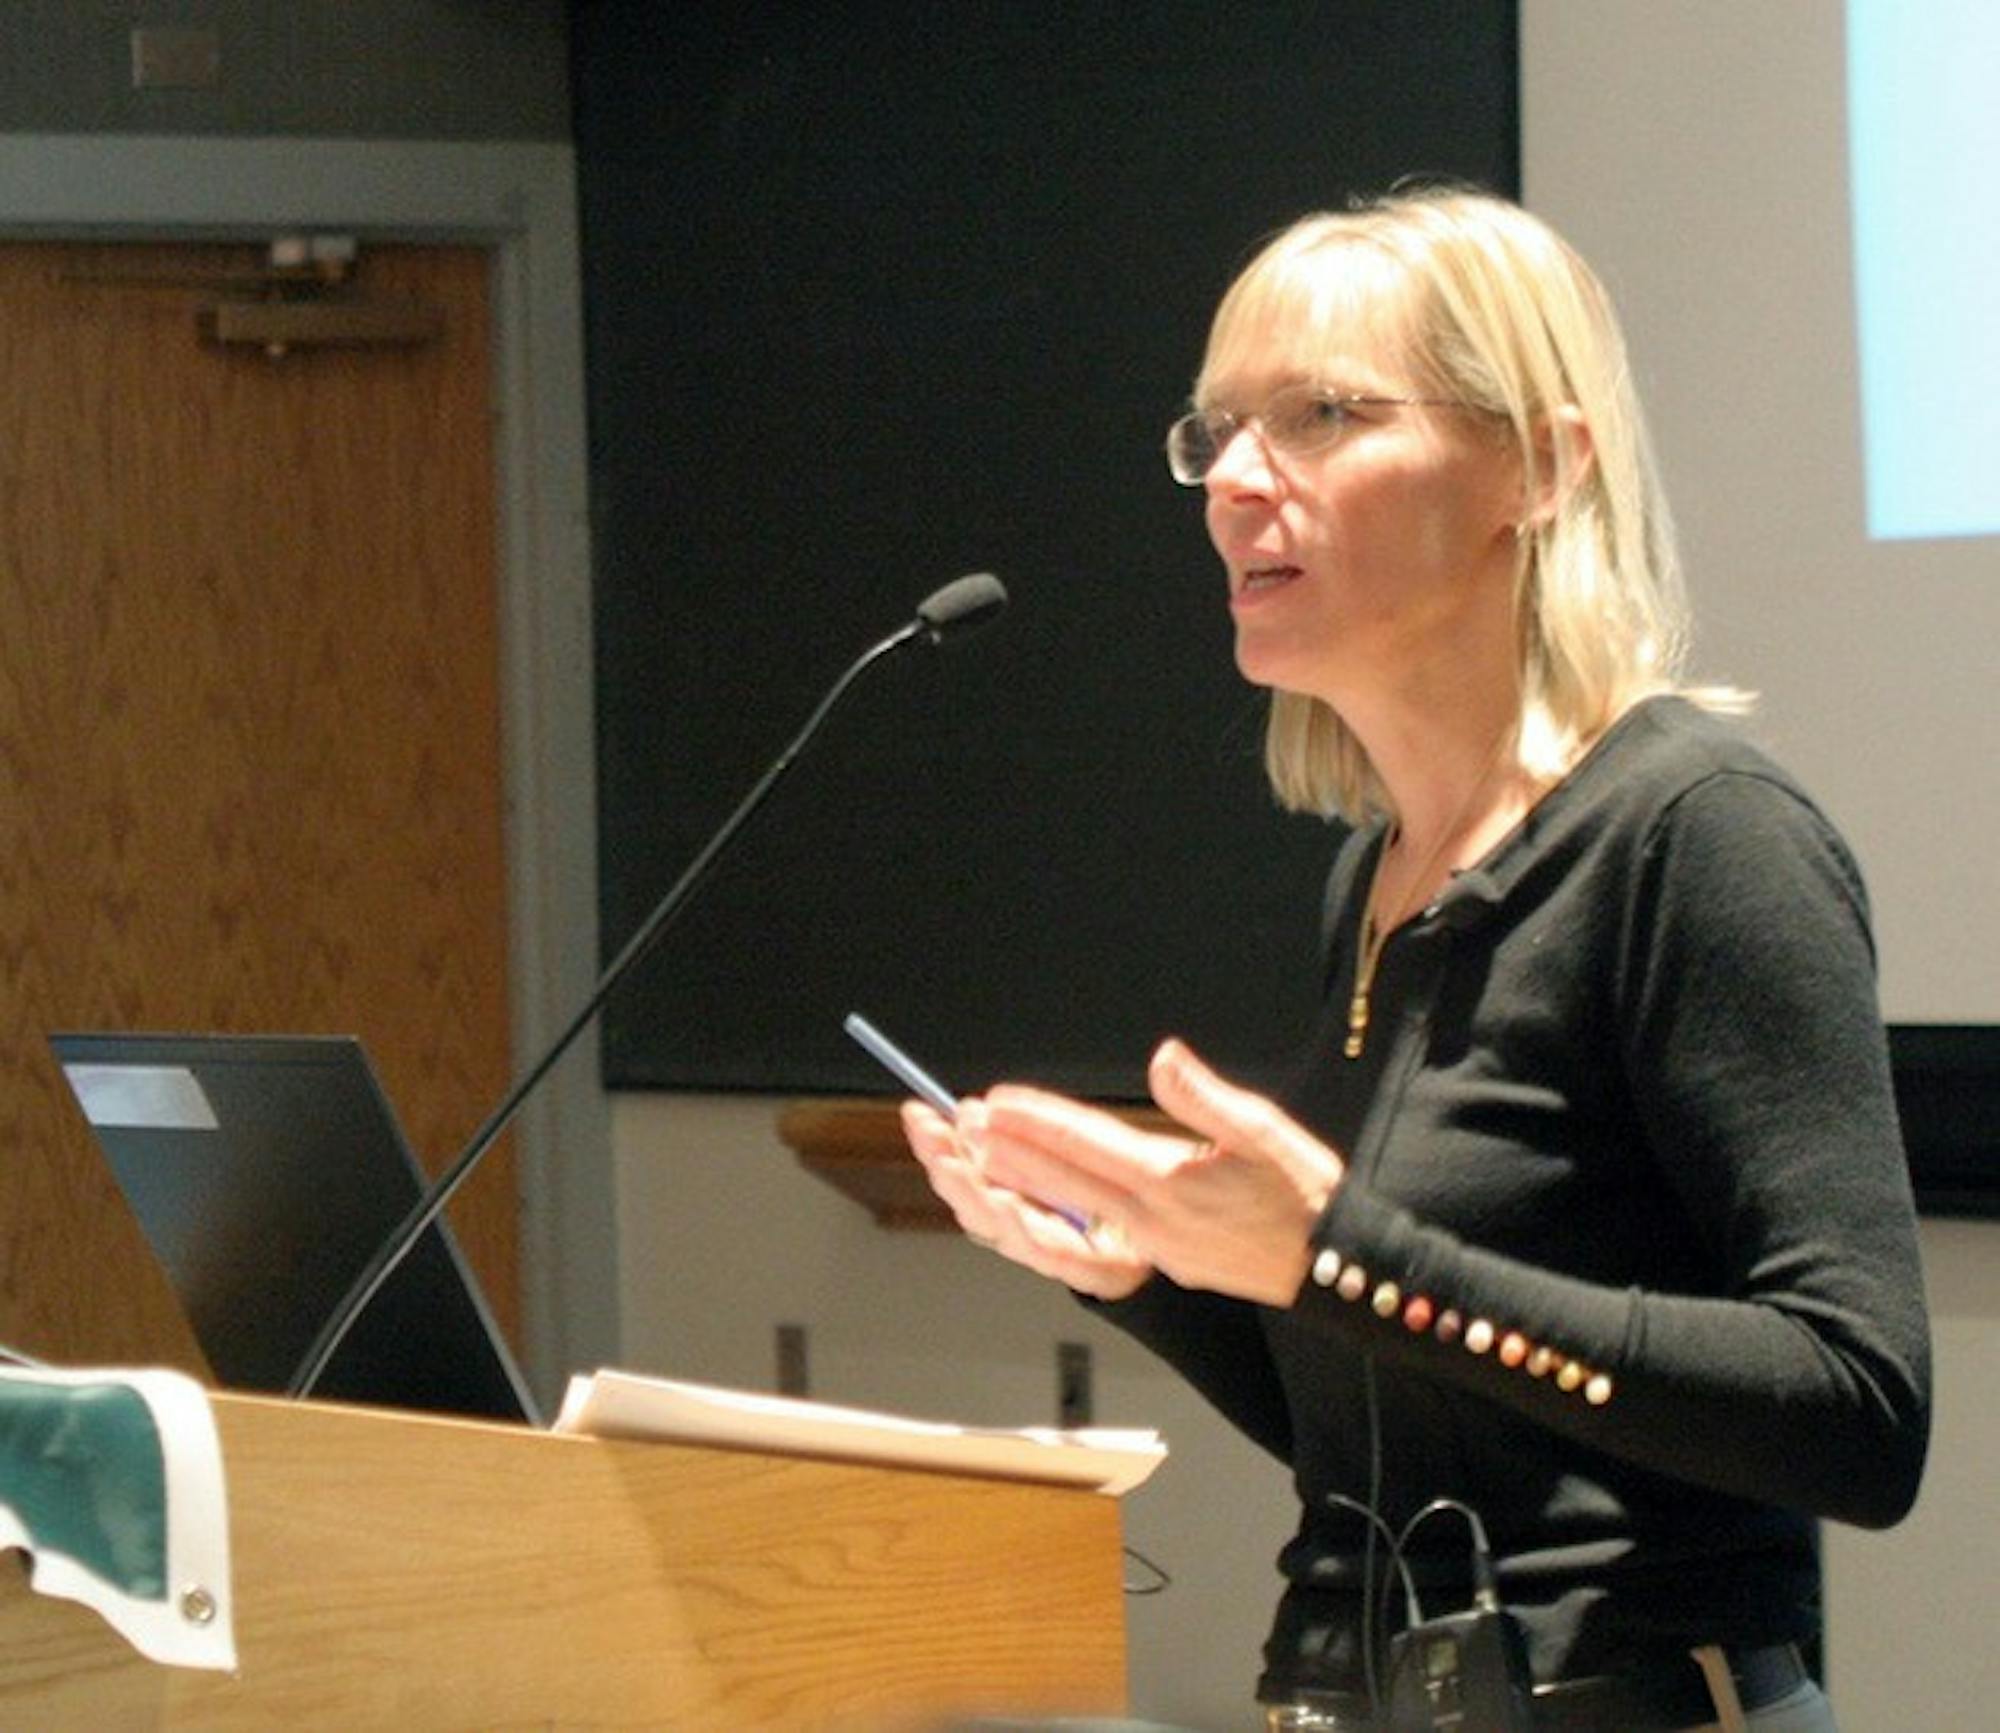 Cathy Zoi Th'85, CEO of the Alliance for Climate Protection, speaks on the climate crisis Friday afternoon at Spanos Auditorium.